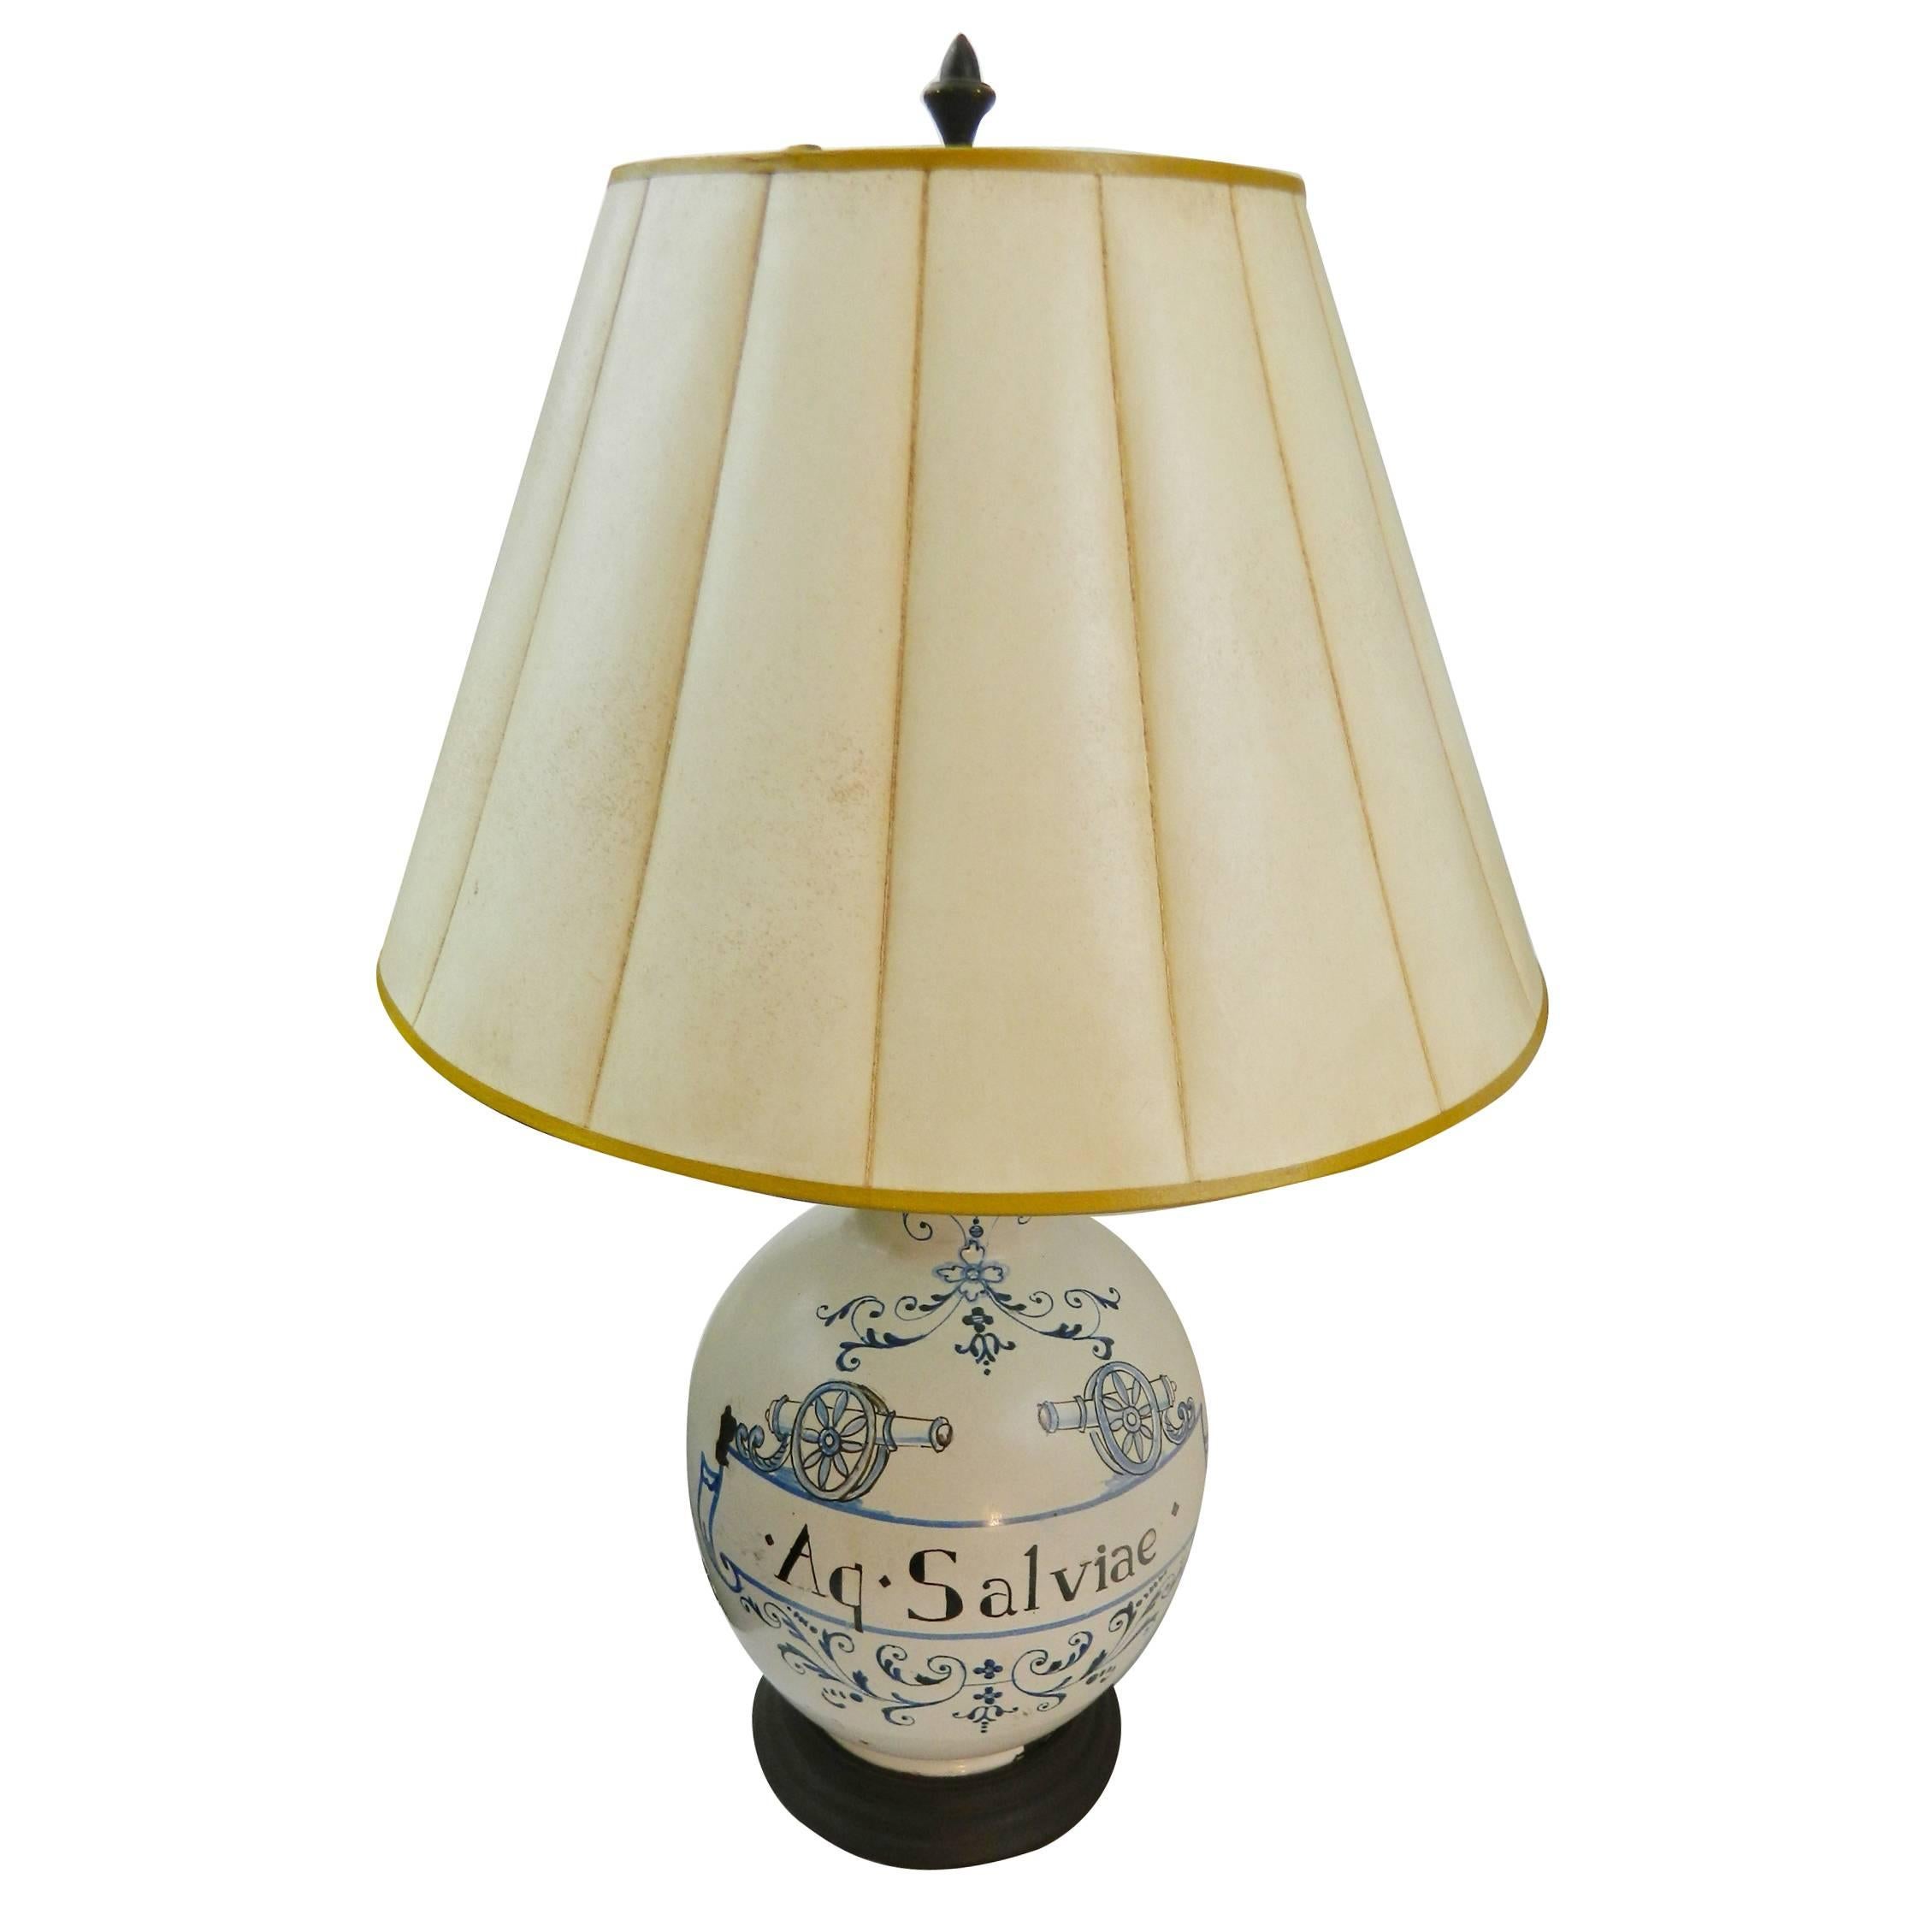 20th Century French Hand Painted Table Lamp on a Wood Base